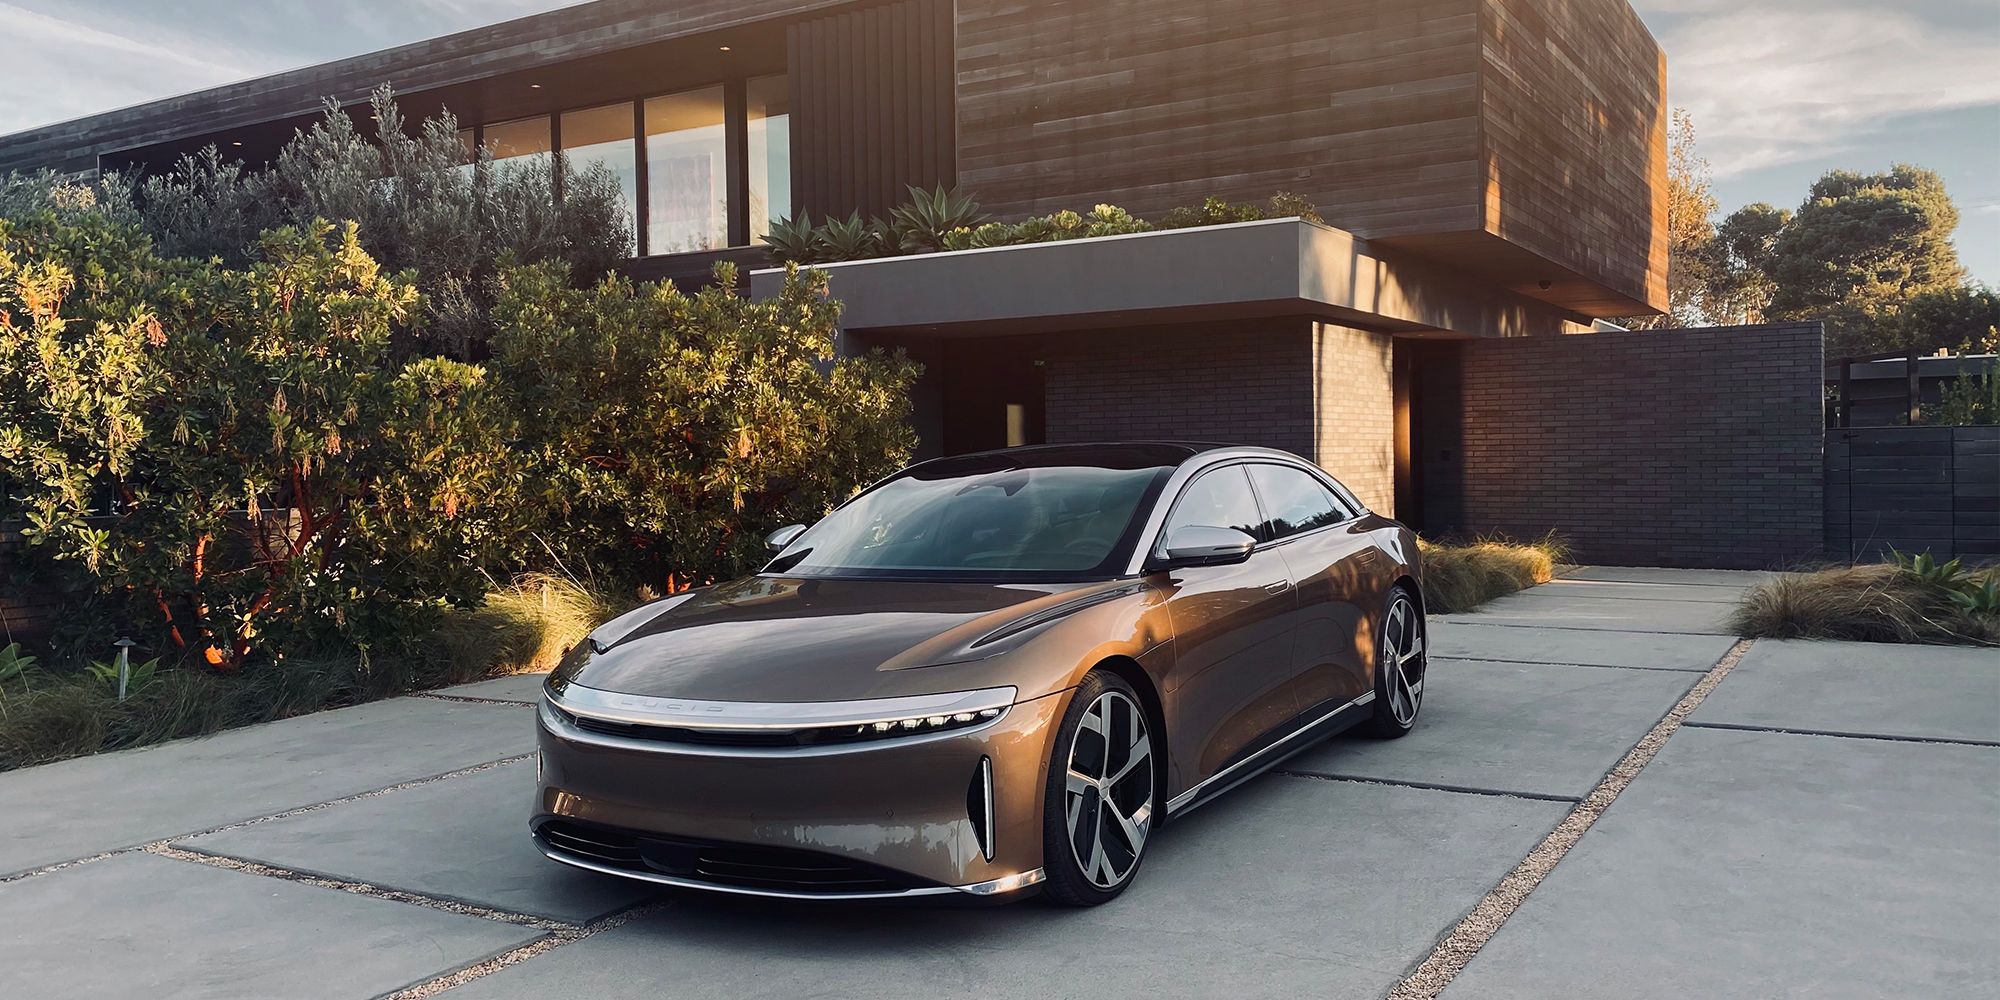 10 Things We Love About The New Lucid Air